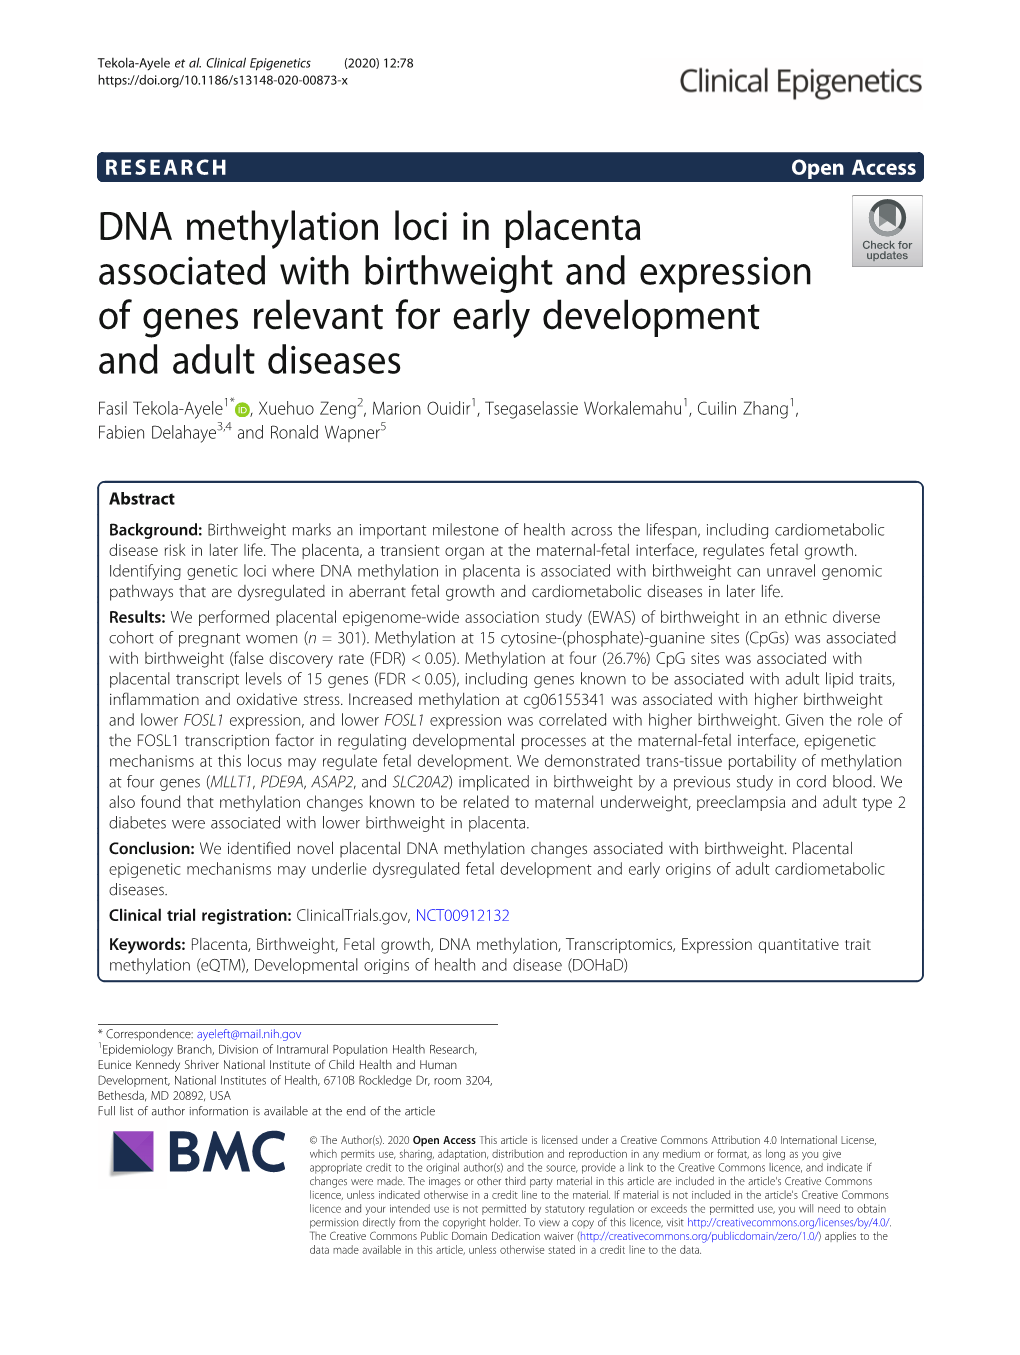 DNA Methylation Loci in Placenta Associated with Birthweight And